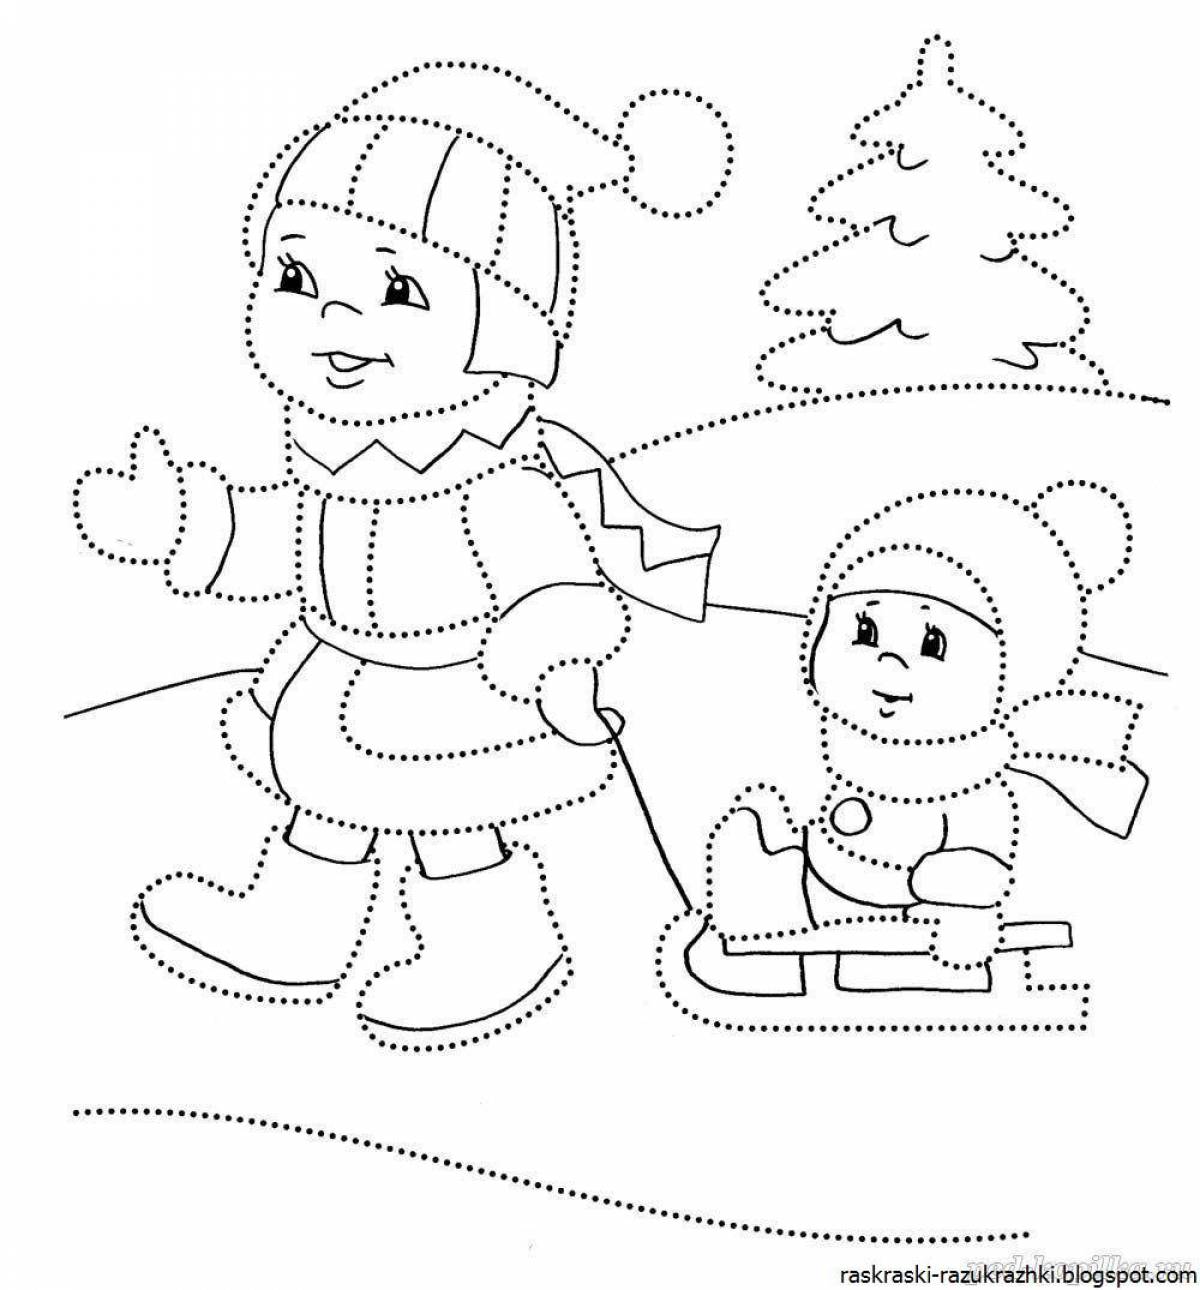 Fun coloring for children 4-5 years old in the kindergarten group